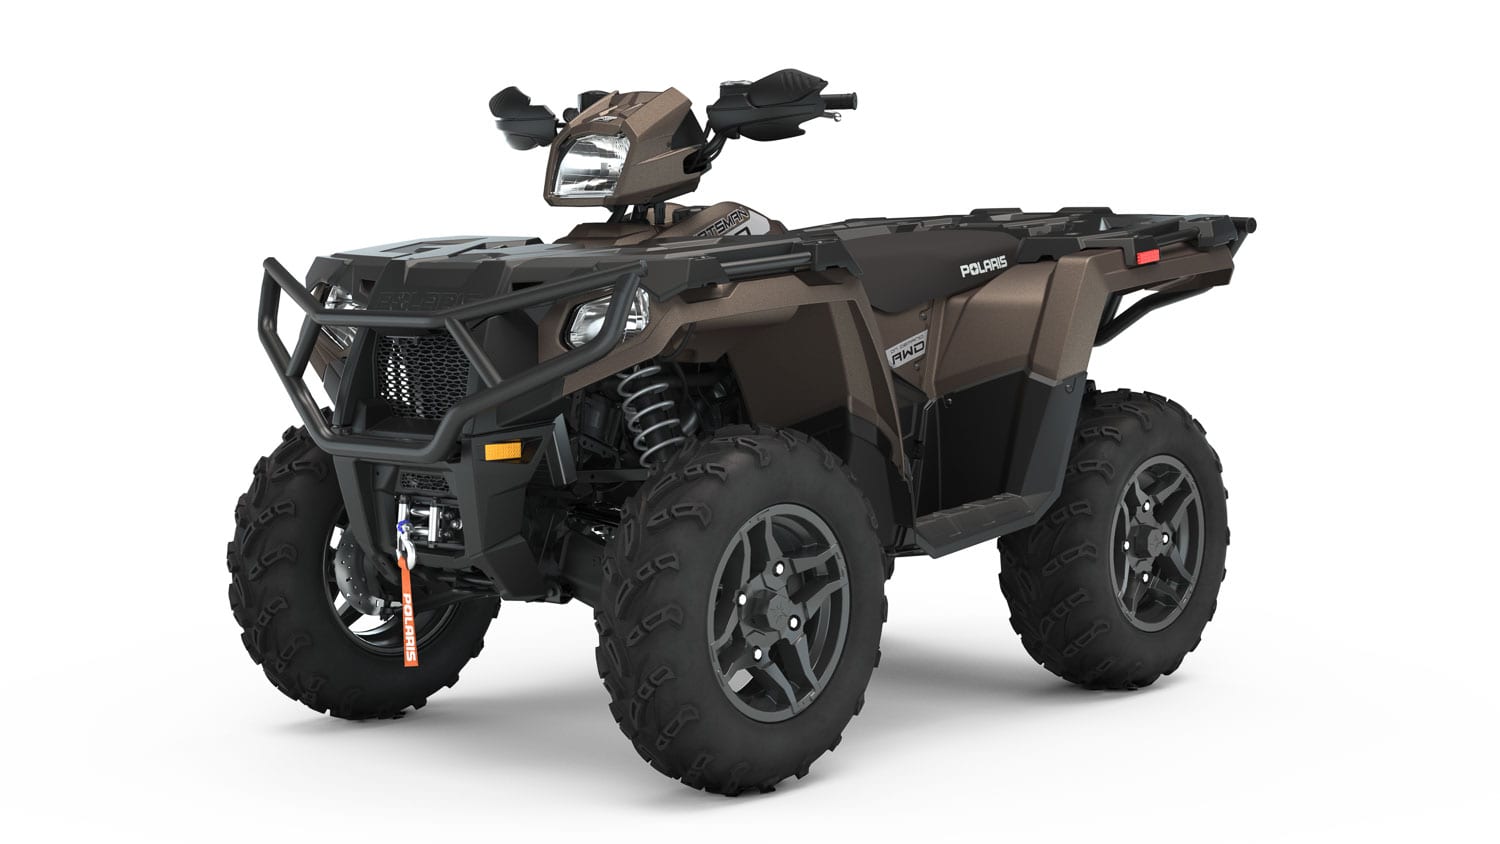 2020 RZR and Sportsman Limited-Edition Models